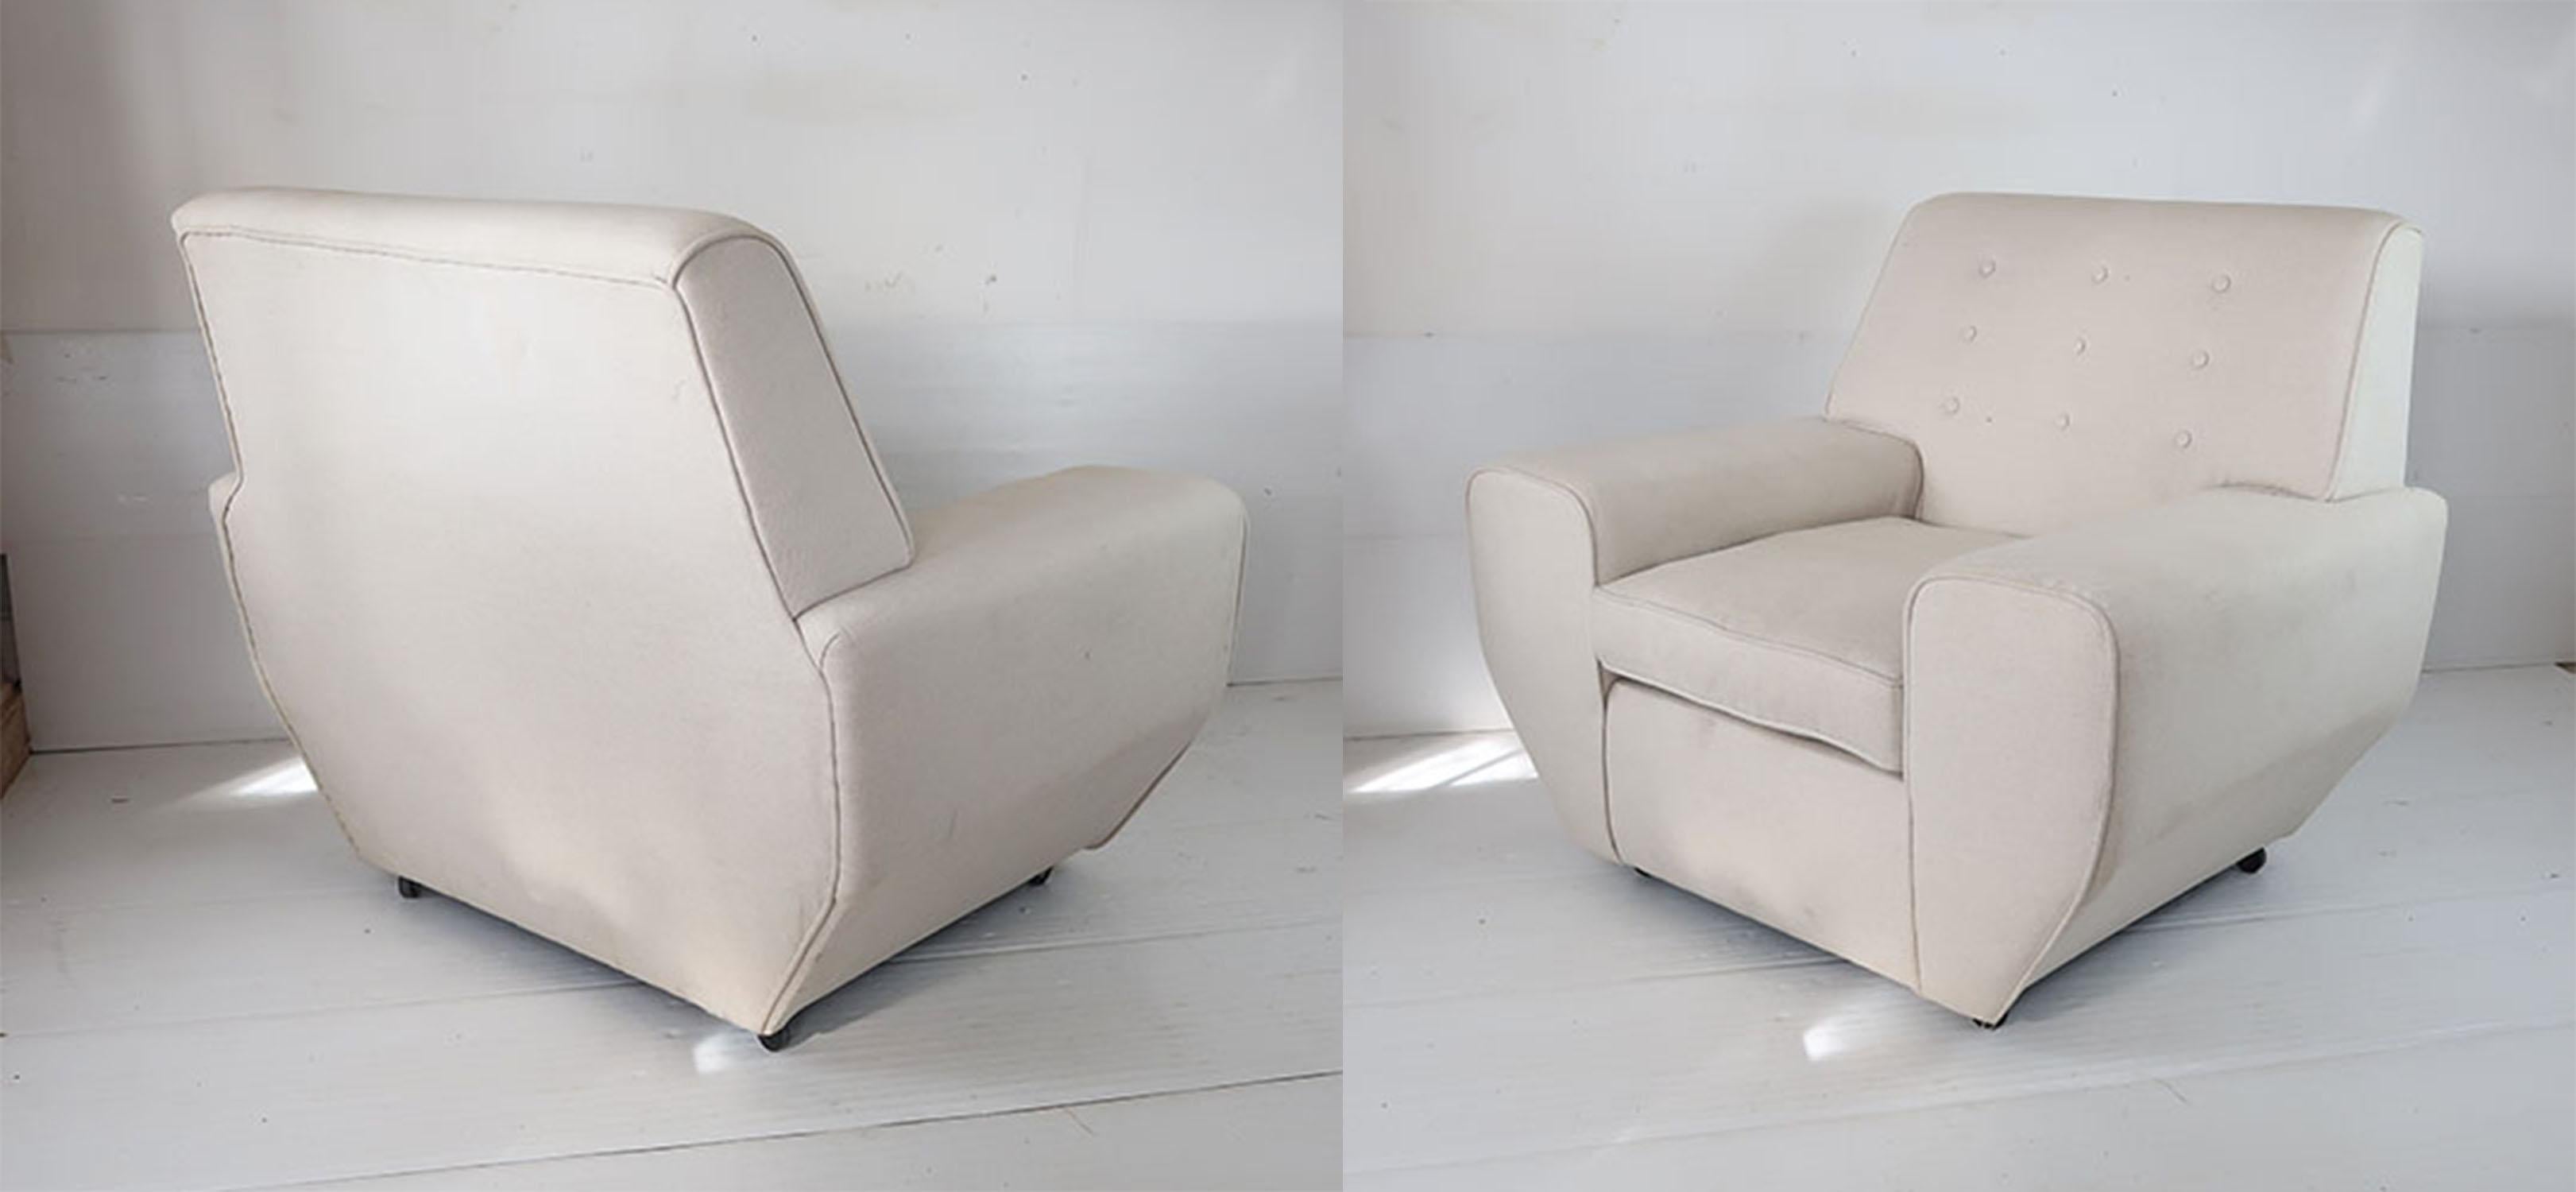 Pair of Geometric Cream Linen Upholstered Midcentury Lounge Chairs In Good Condition For Sale In St Annes, Lancashire